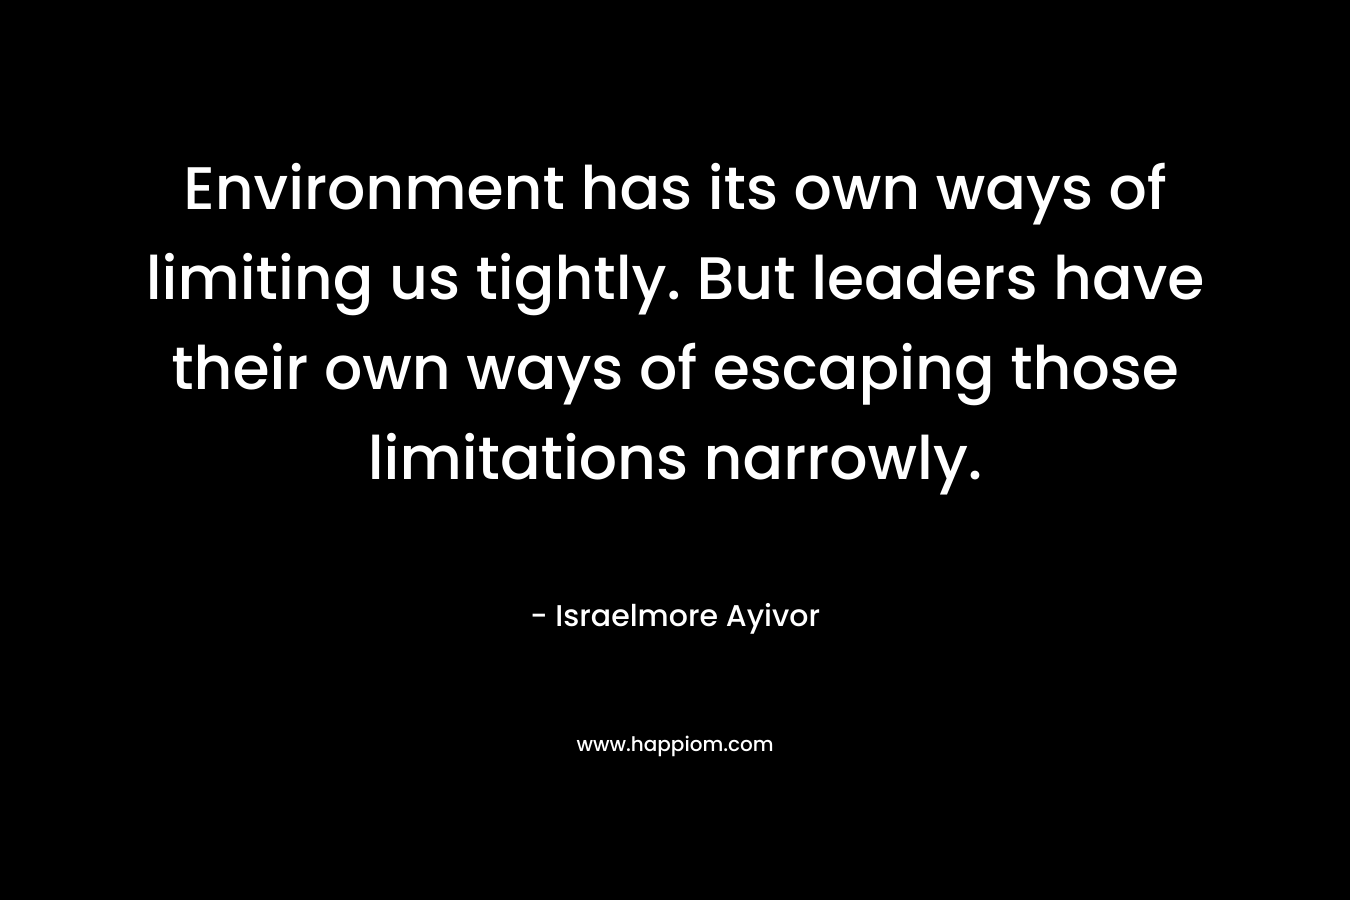 Environment has its own ways of limiting us tightly. But leaders have their own ways of escaping those limitations narrowly.